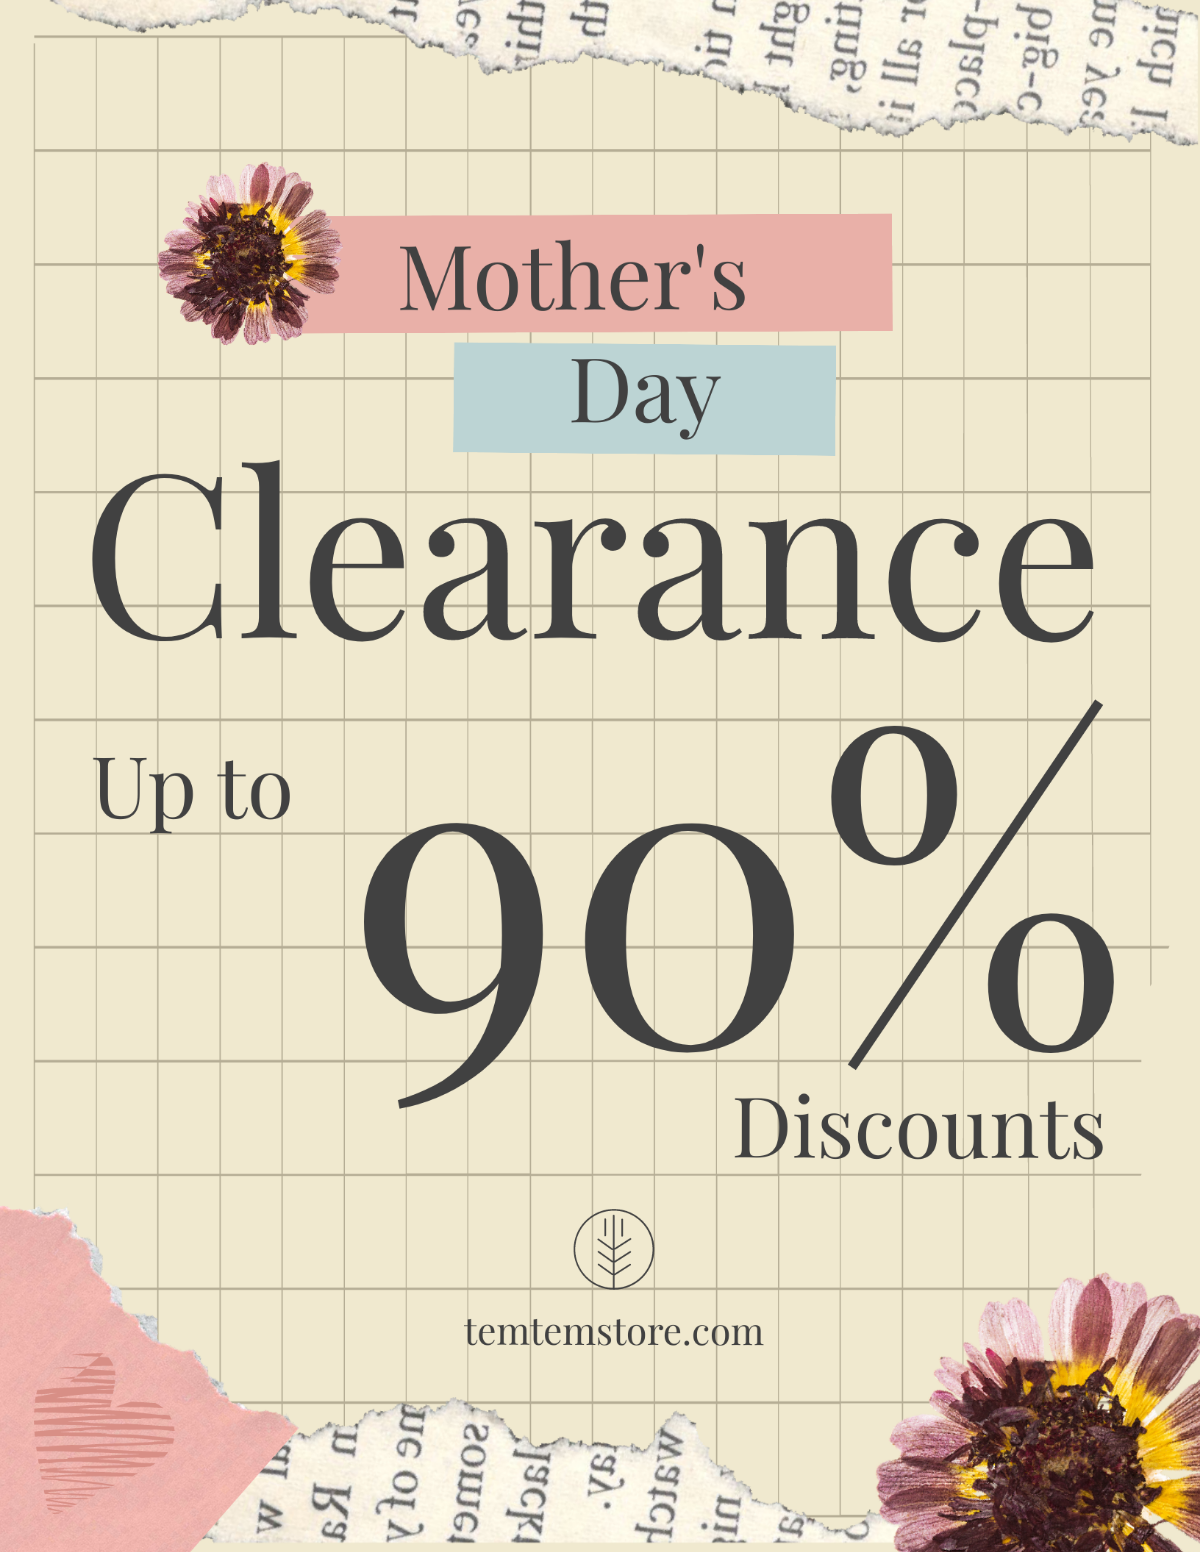 Mother's Day Advertising Flyer Template